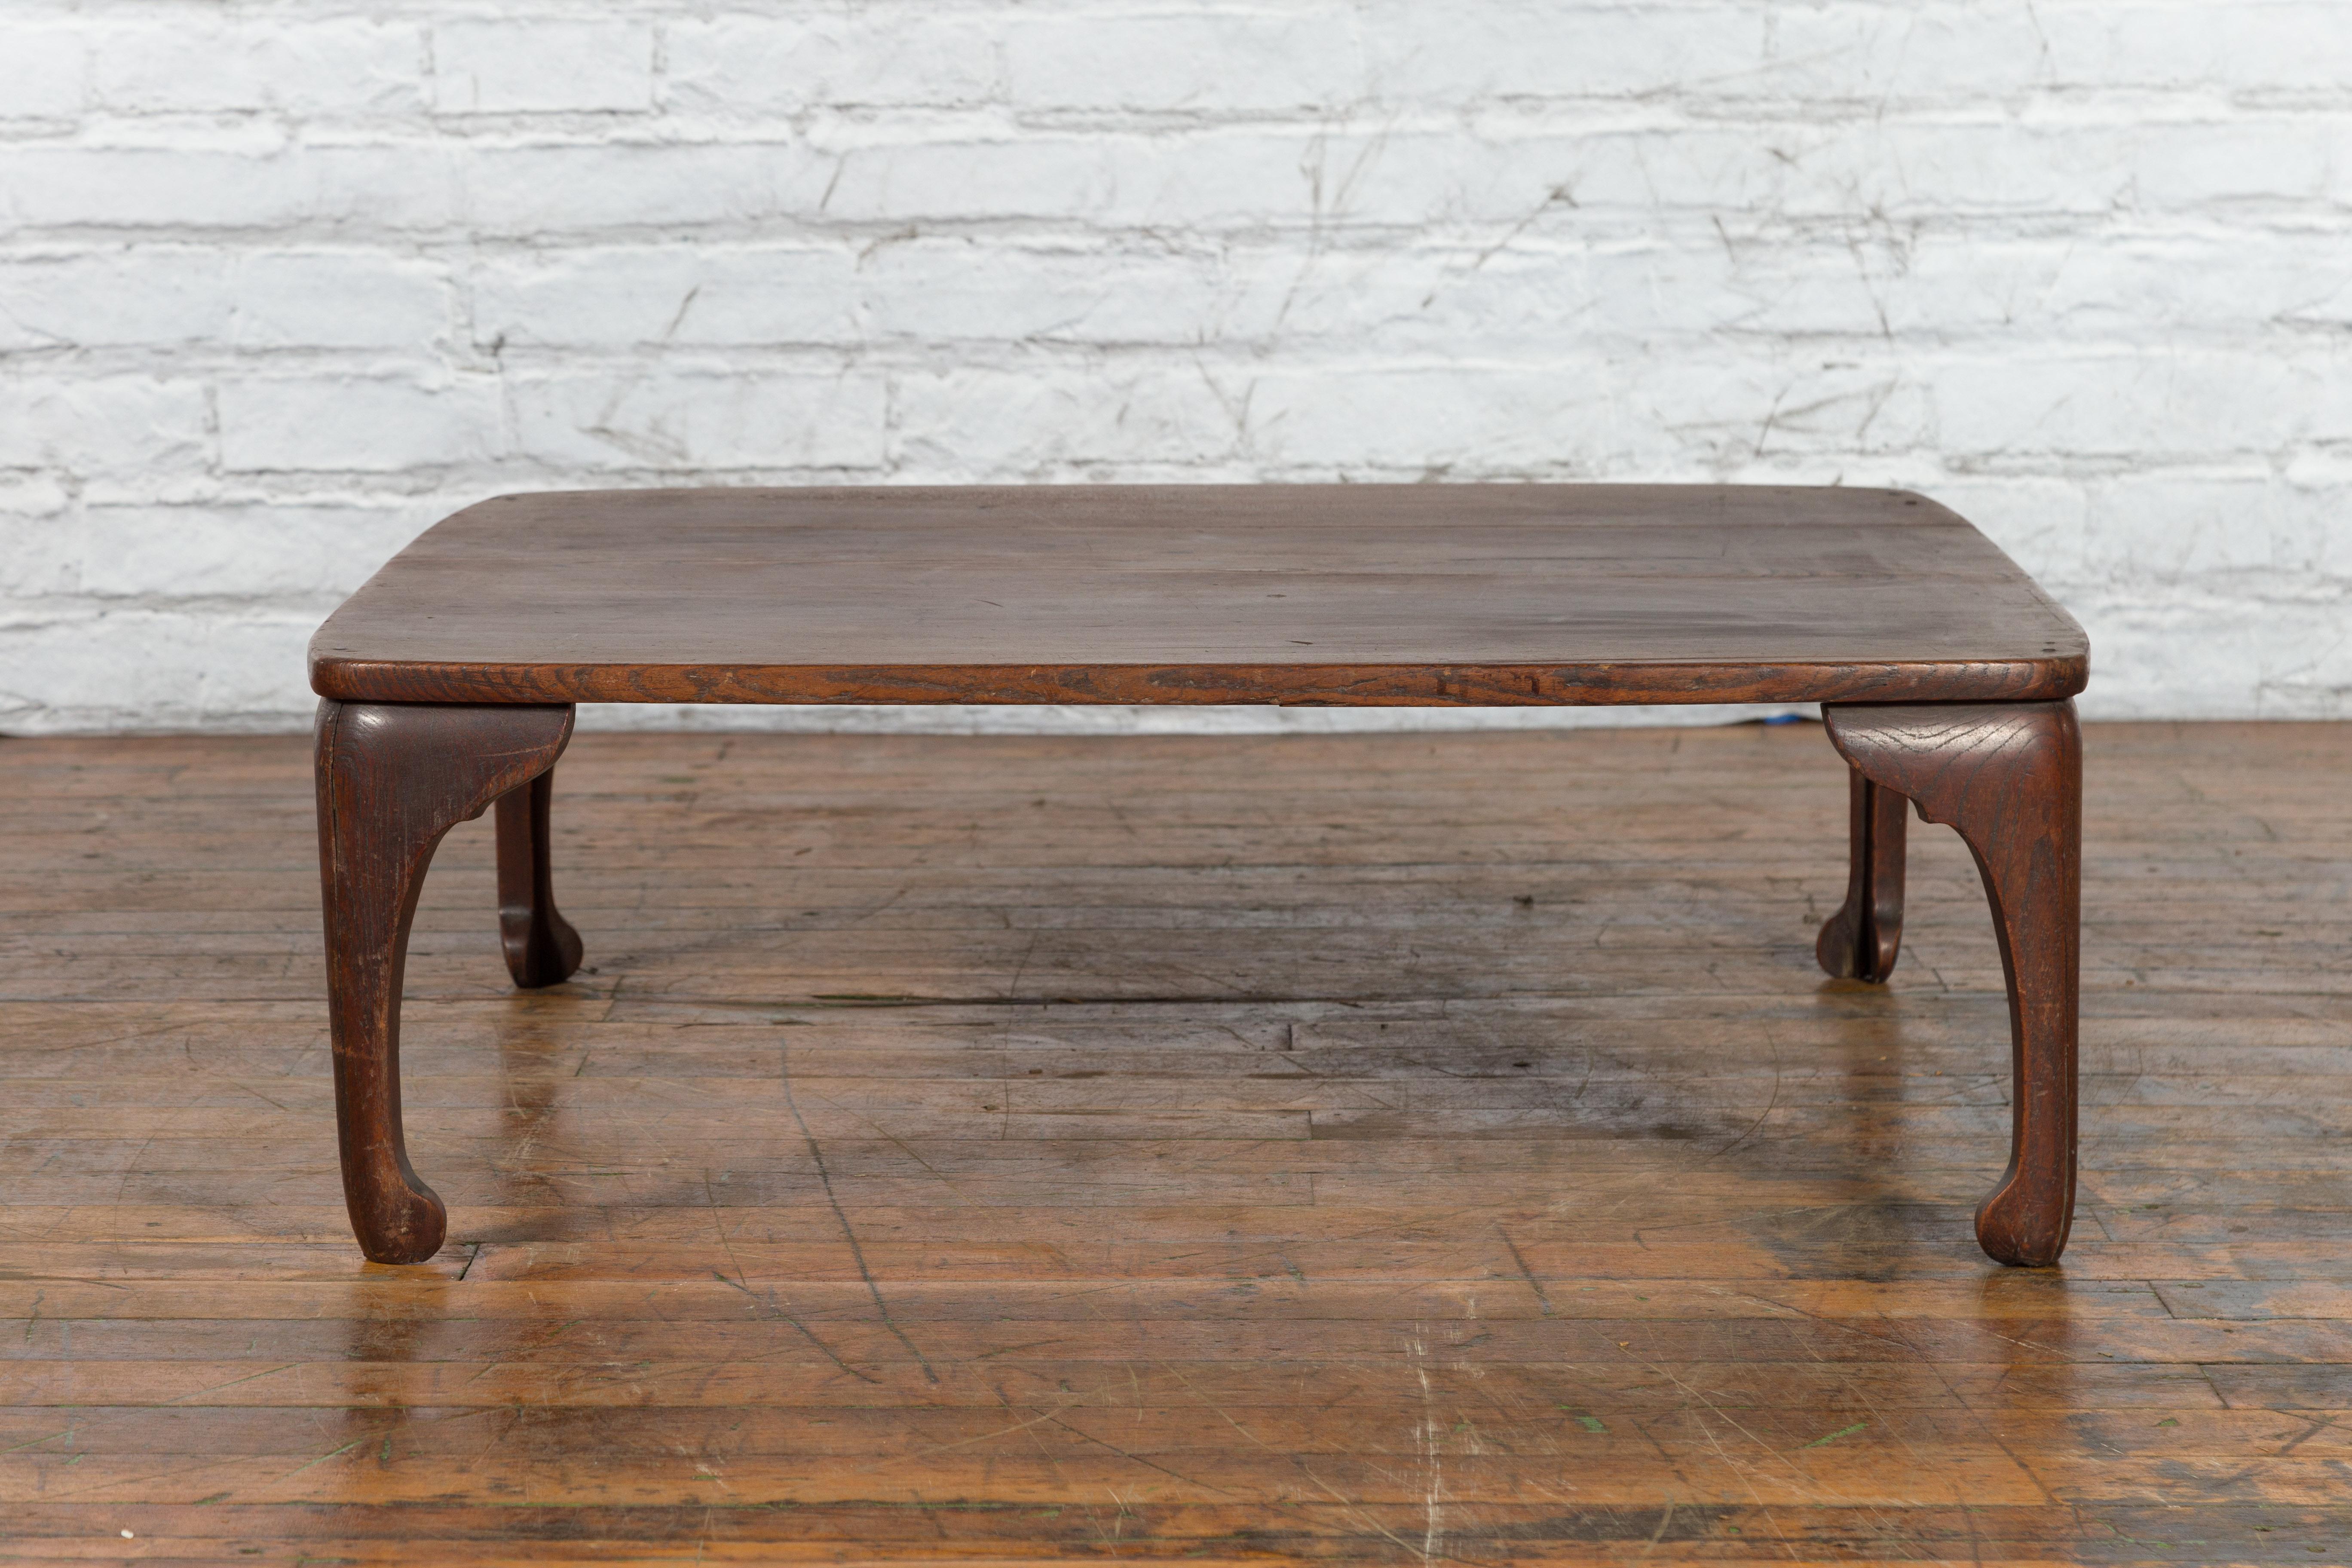 A Chinese antique low wooden table from the early 20th century, with curving legs. Created in China during the early years of the 20th century, this low wooden table features a simple rectangular top sitting above four delicately curving legs.